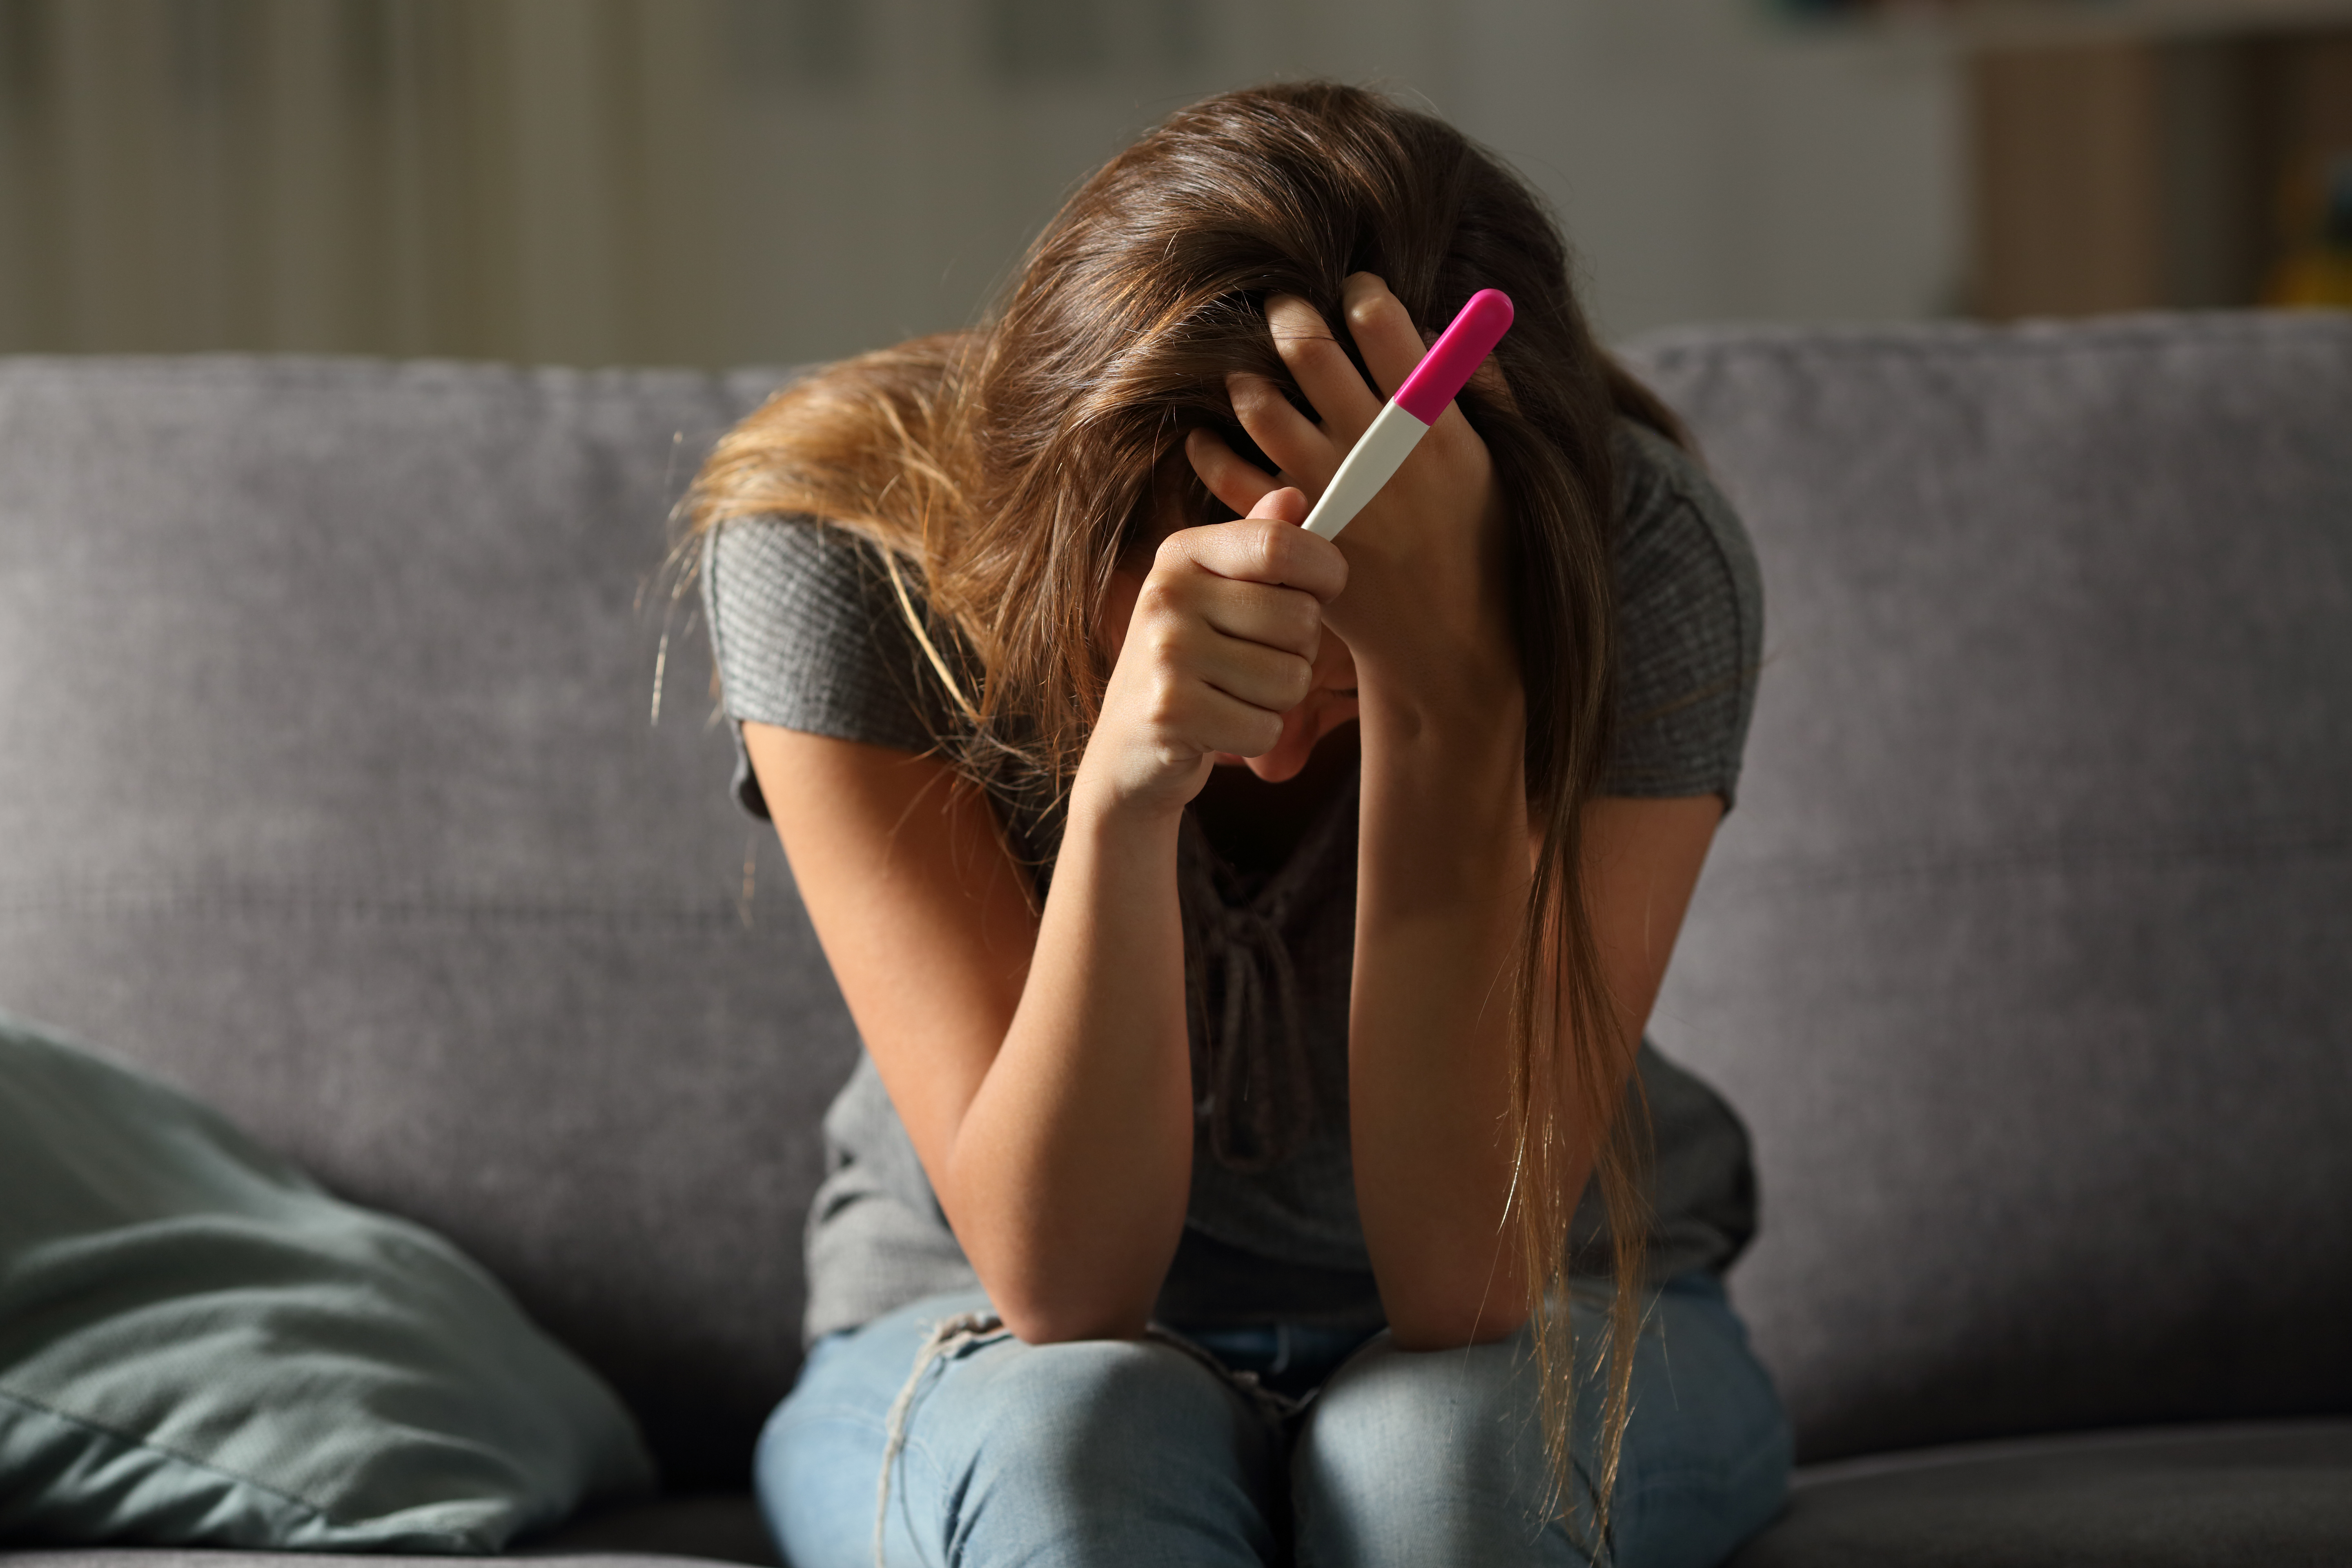 A sad woman holding a pregnancy test | Source: Shutterstock